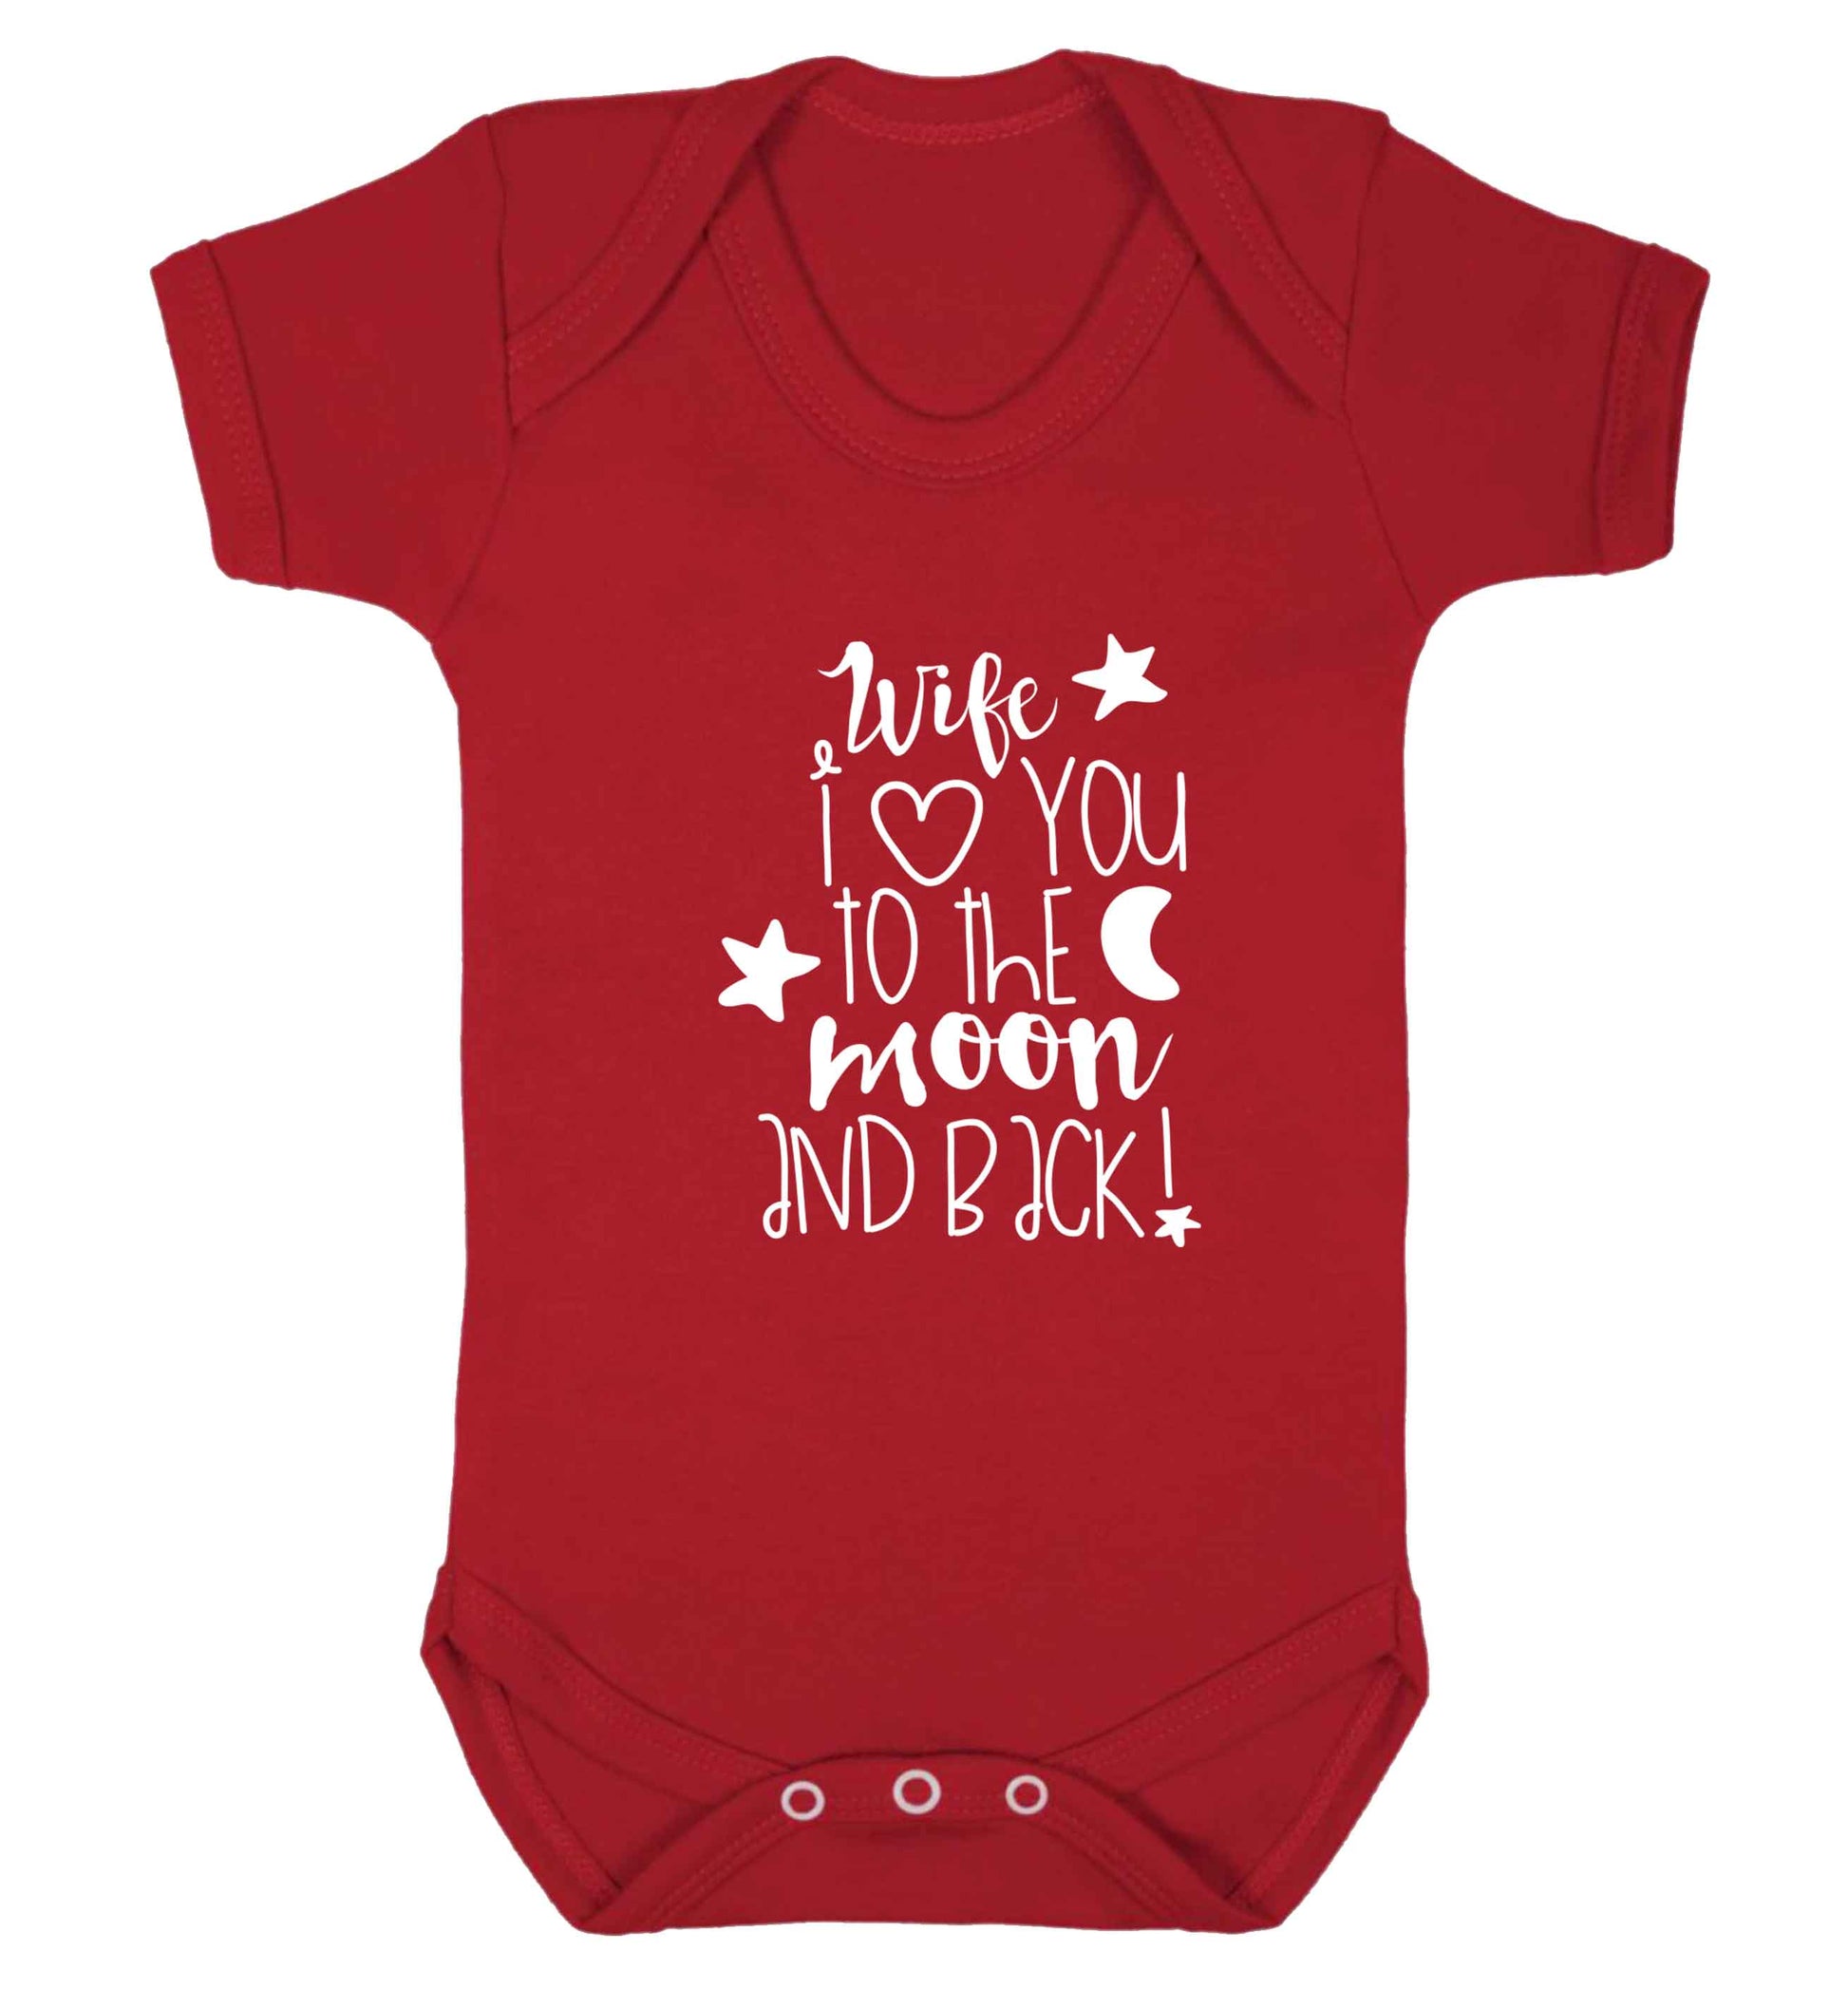 Wife I love you to the moon and back baby vest red 18-24 months